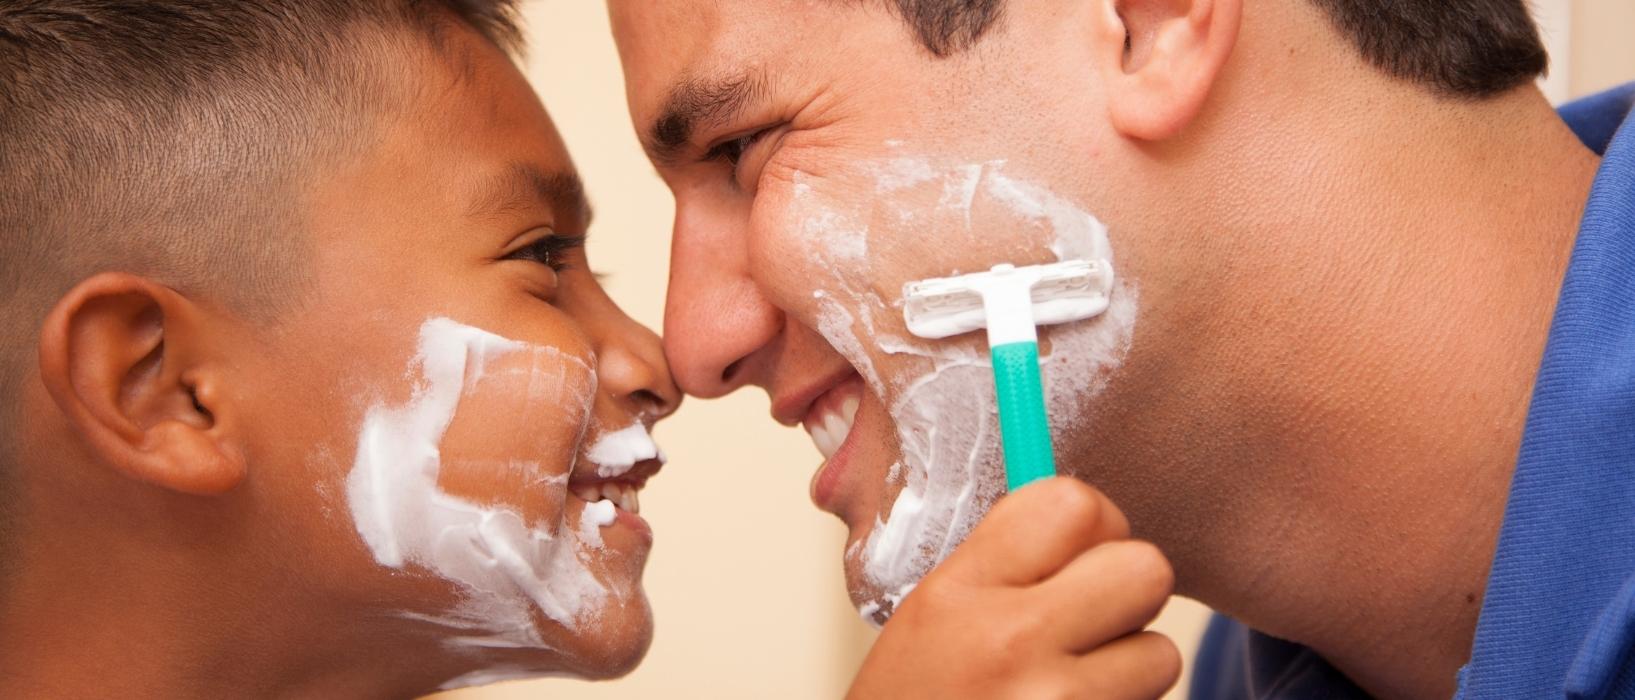 close up of rather and sons faces, noses touching and they are both smiling, shaving cream on their faces. Son is holding up a sustainable razor to his fathers cheek